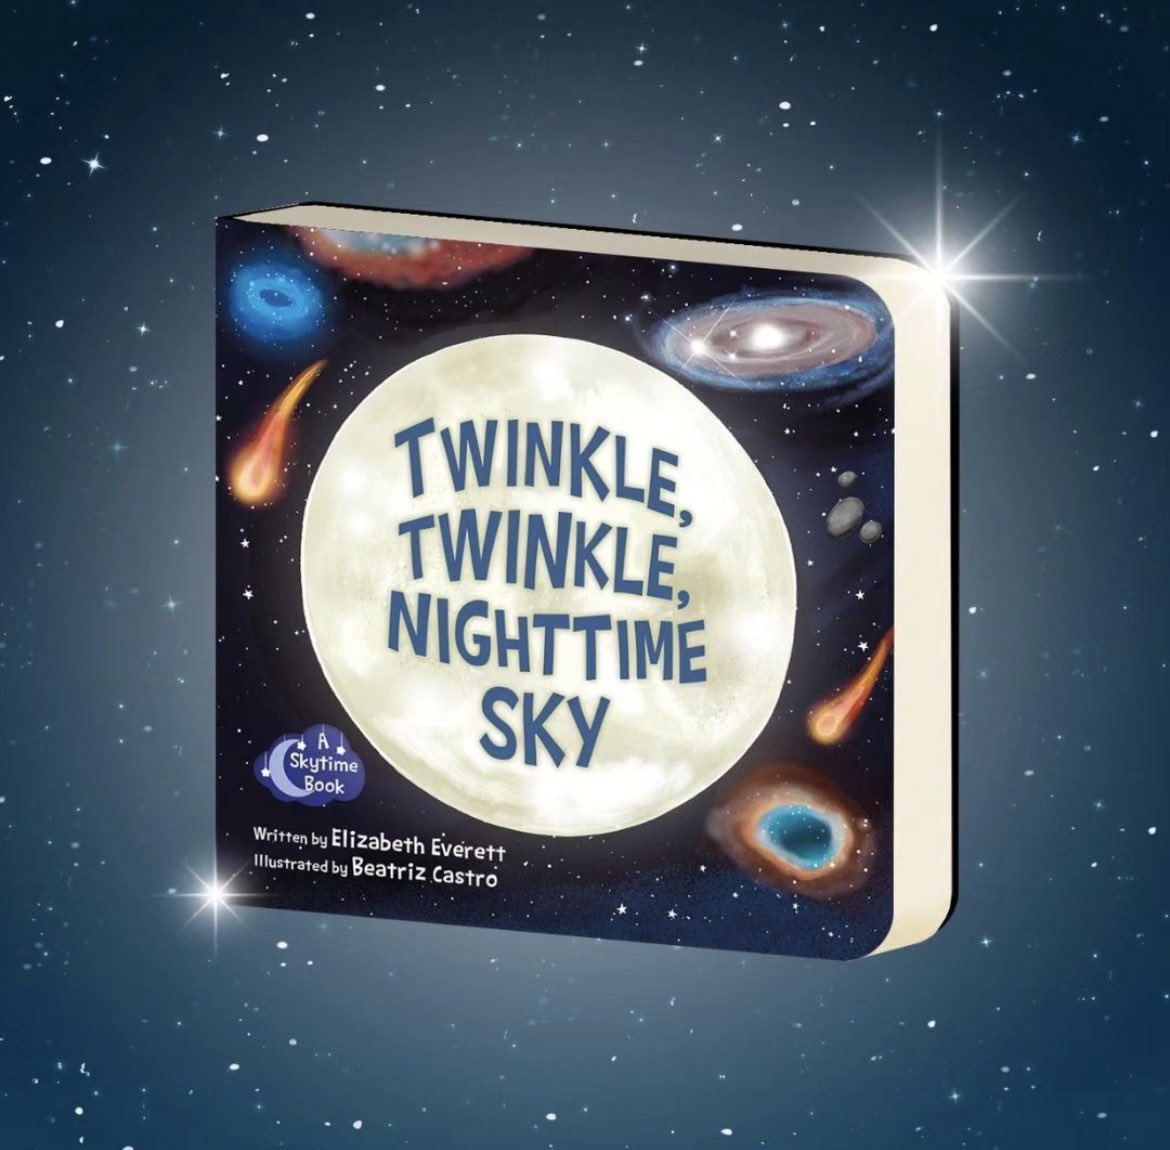 This STEM BB is engaging, educational, & dreamy. The rhyming text & captivating art in TWINKLE, TWINKLE, NIGHTIME SKY by @EEverettbooks & Beatriz Castro will fill little ones with wonder & a desire to learn more about the universe. A perfect choice for bedtime and camping trips!